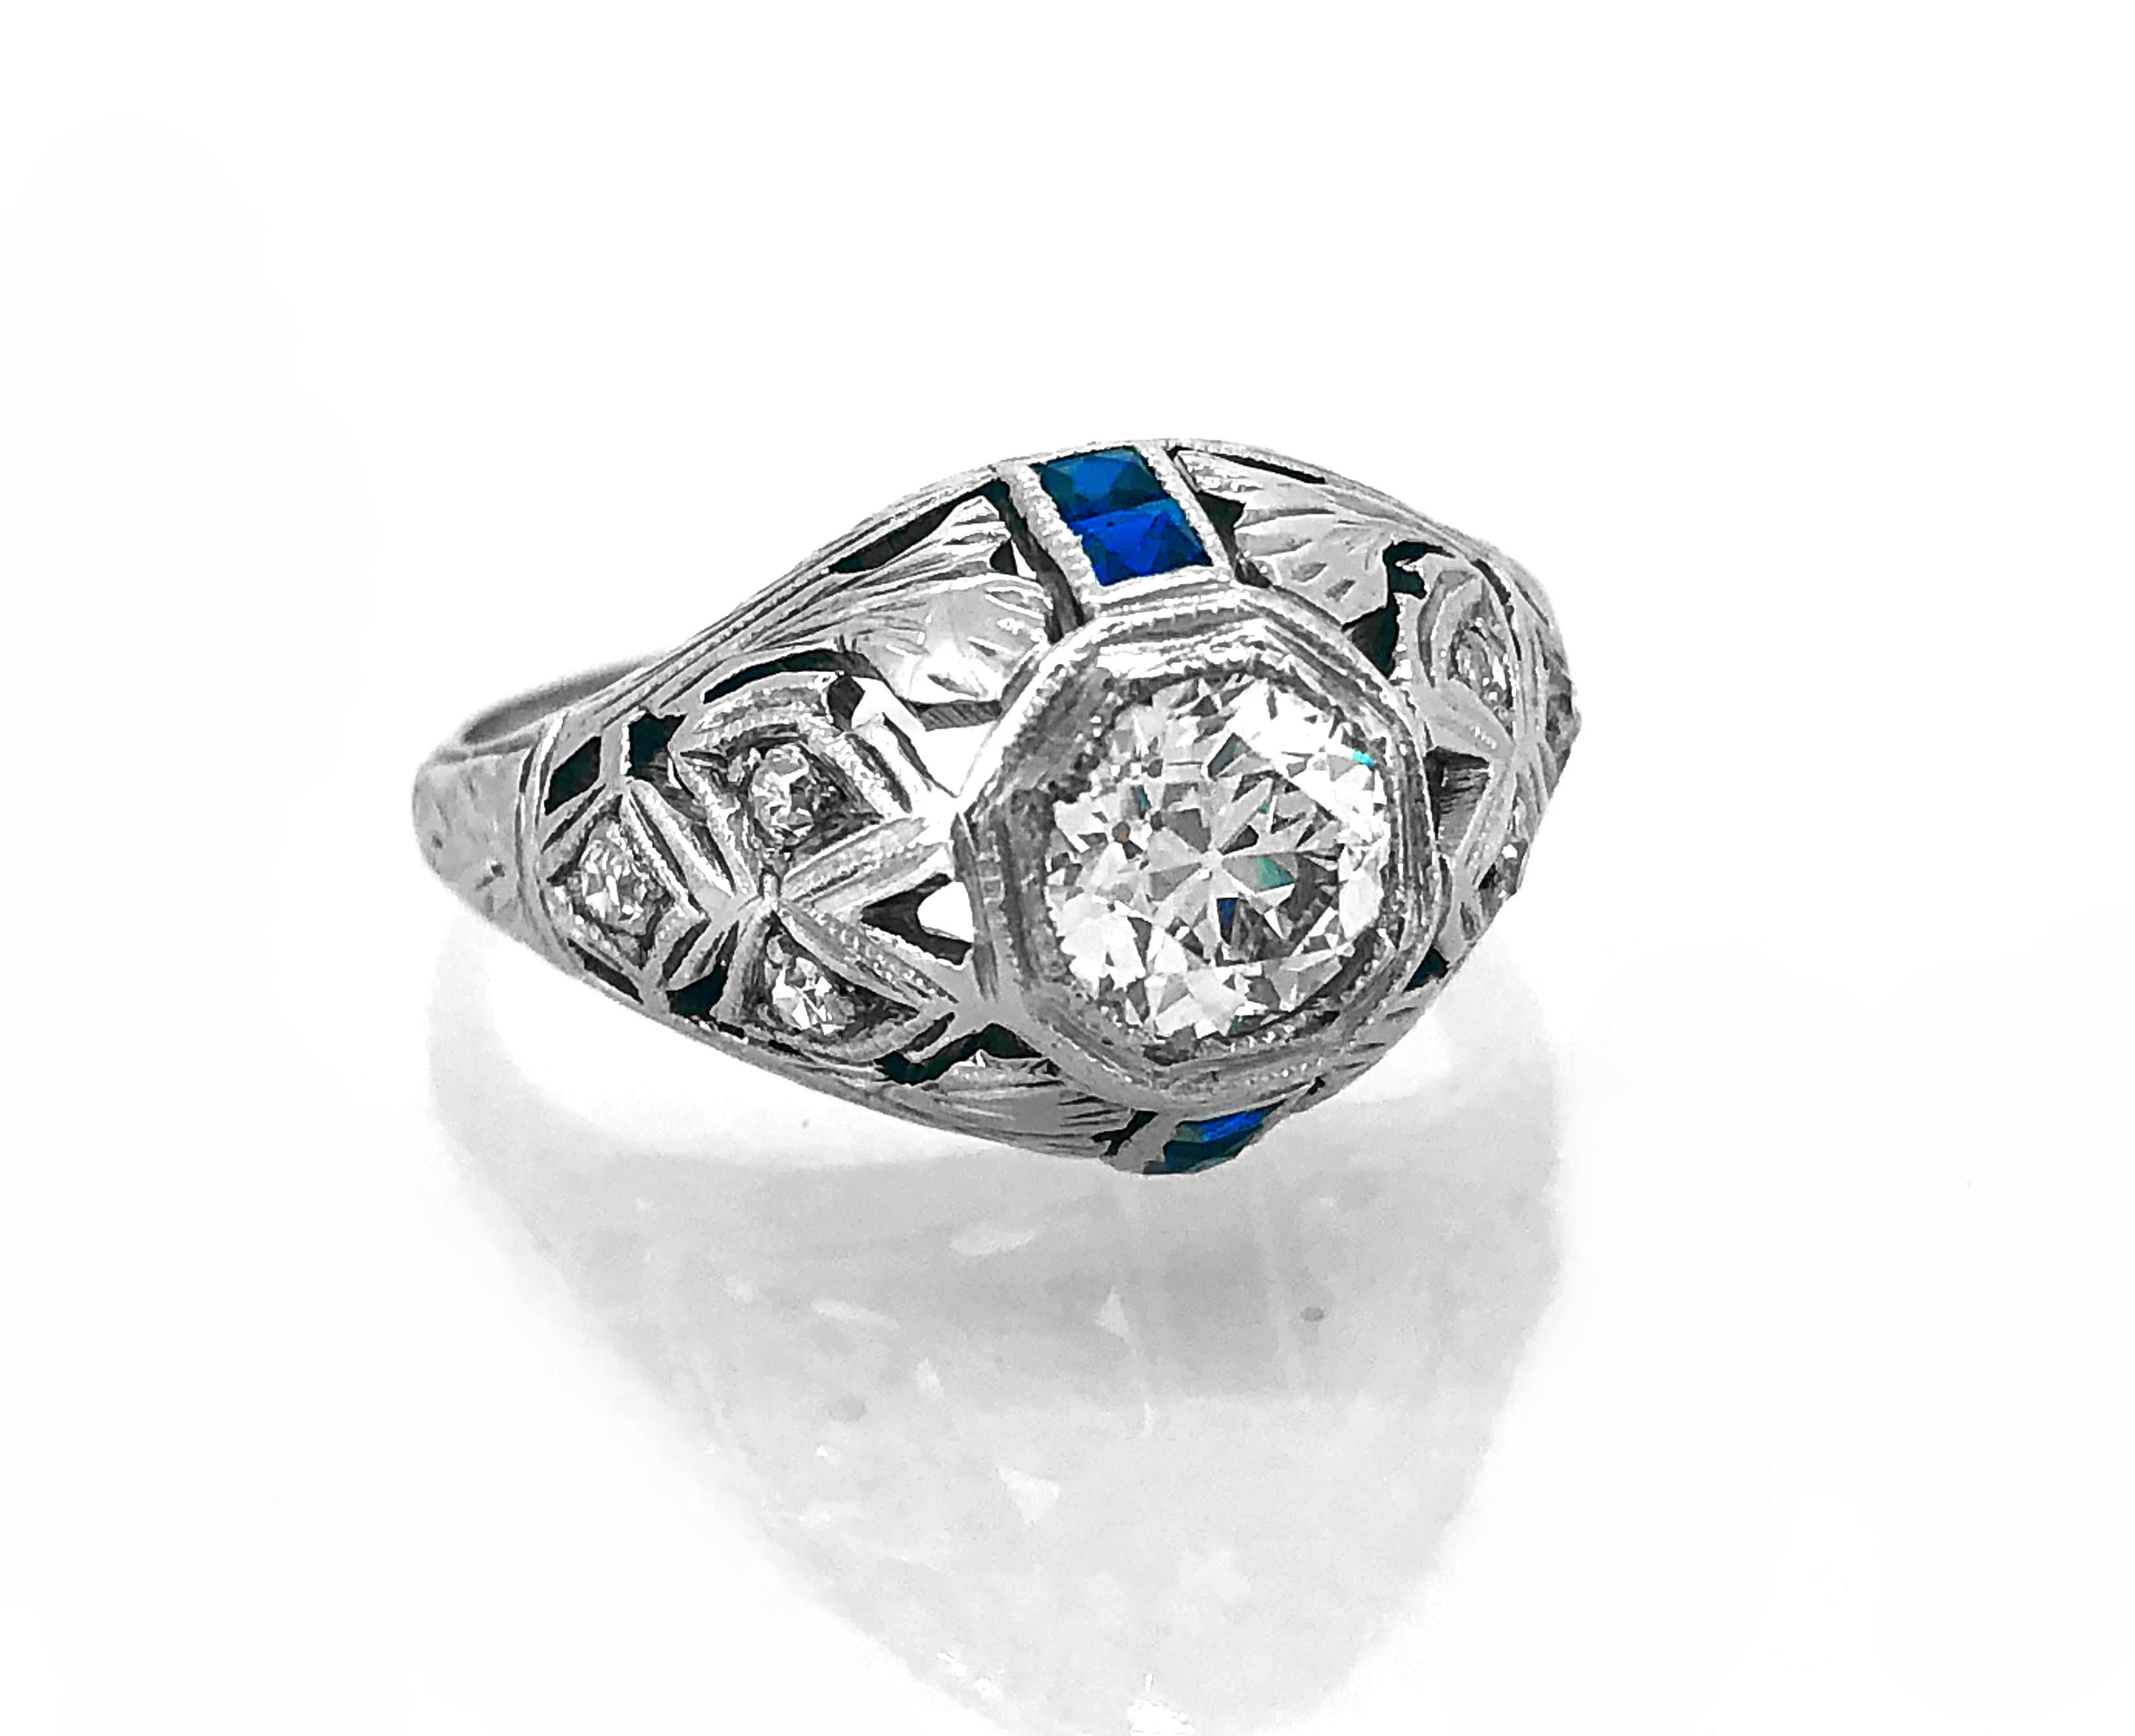 A beautifully designed & constructed Diamond & Sapphire Art Deco antique engagement ring. It features a .65ct. apx. VS2 clarity and J color center European cut diamond with .06ct. T.W. apx. diamonds on the shank. It is beautifully accented with